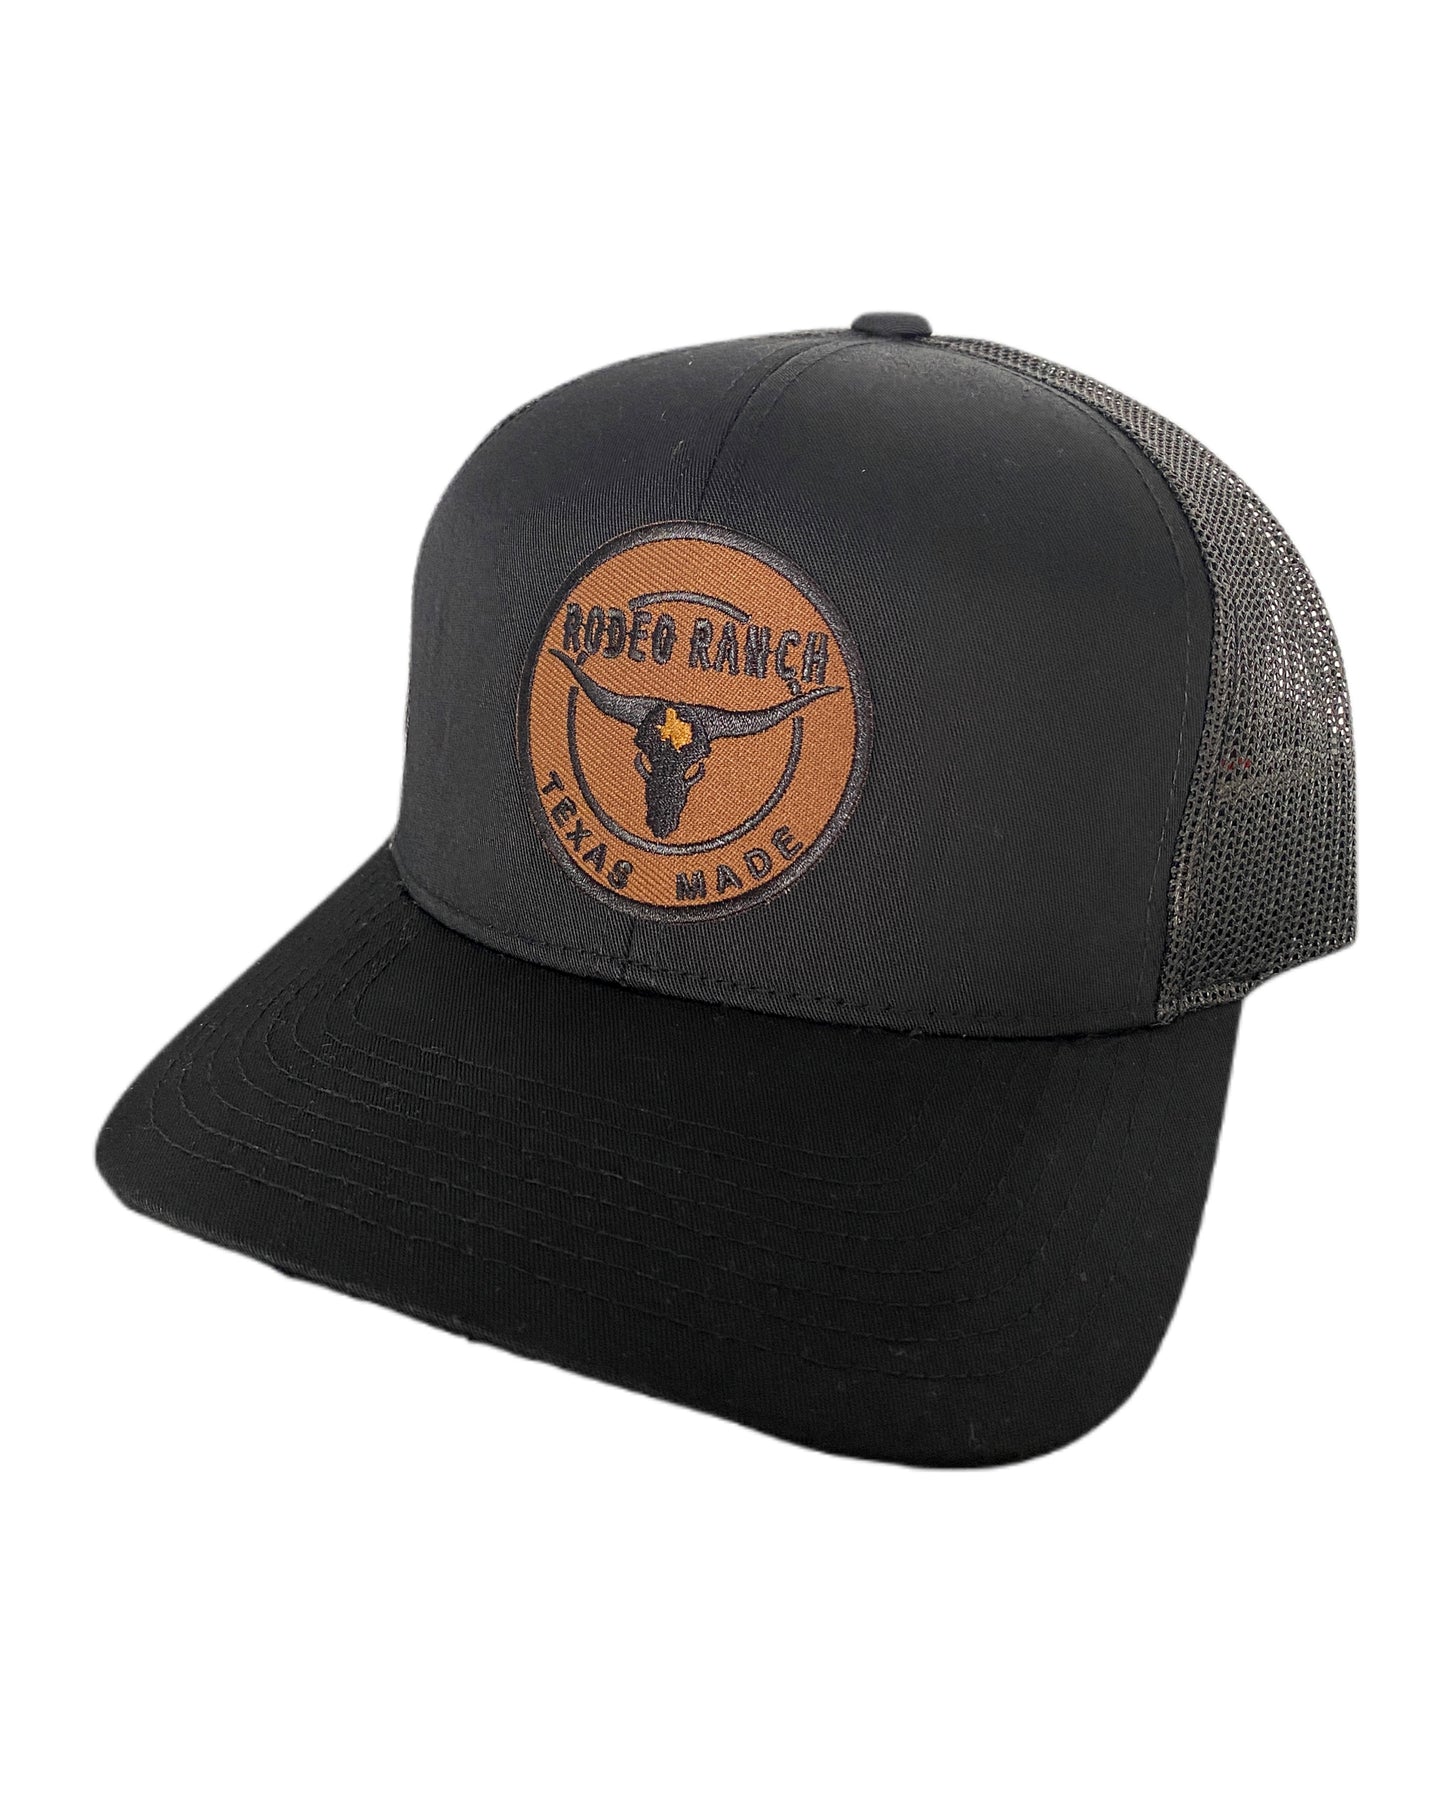 RODEO RANCH BLACK TEXAS MADE HAT